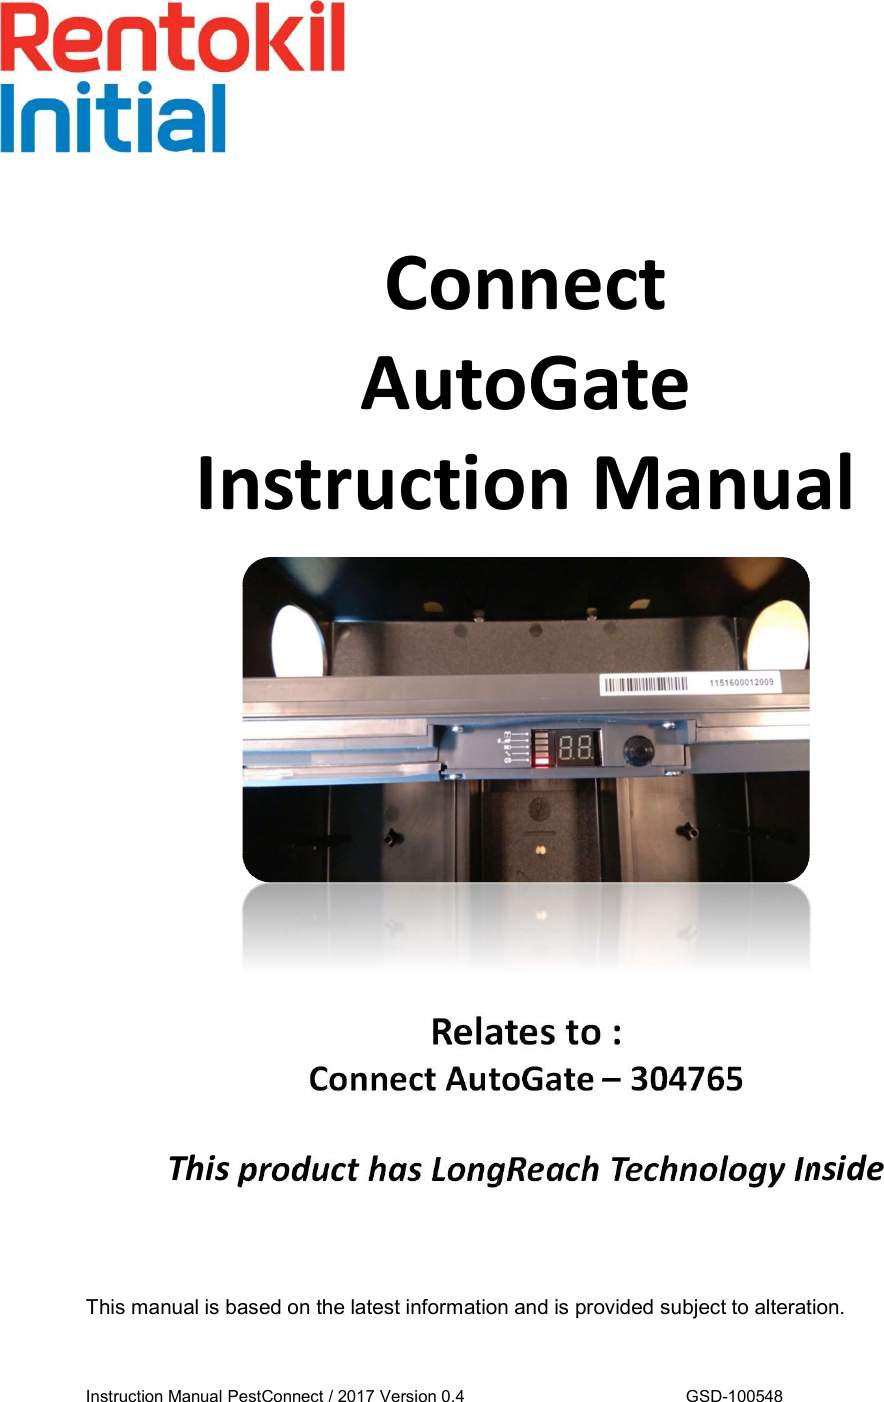 ConnectAutoGateInstruction ManualThis manual is based on the latest information and is provided subject to alteration.Instruction Manual PestConnect / 2017 Version 0.4 GSD-100548Relates to :Connect AutoGate – 304765This product has LongReach Technology Inside